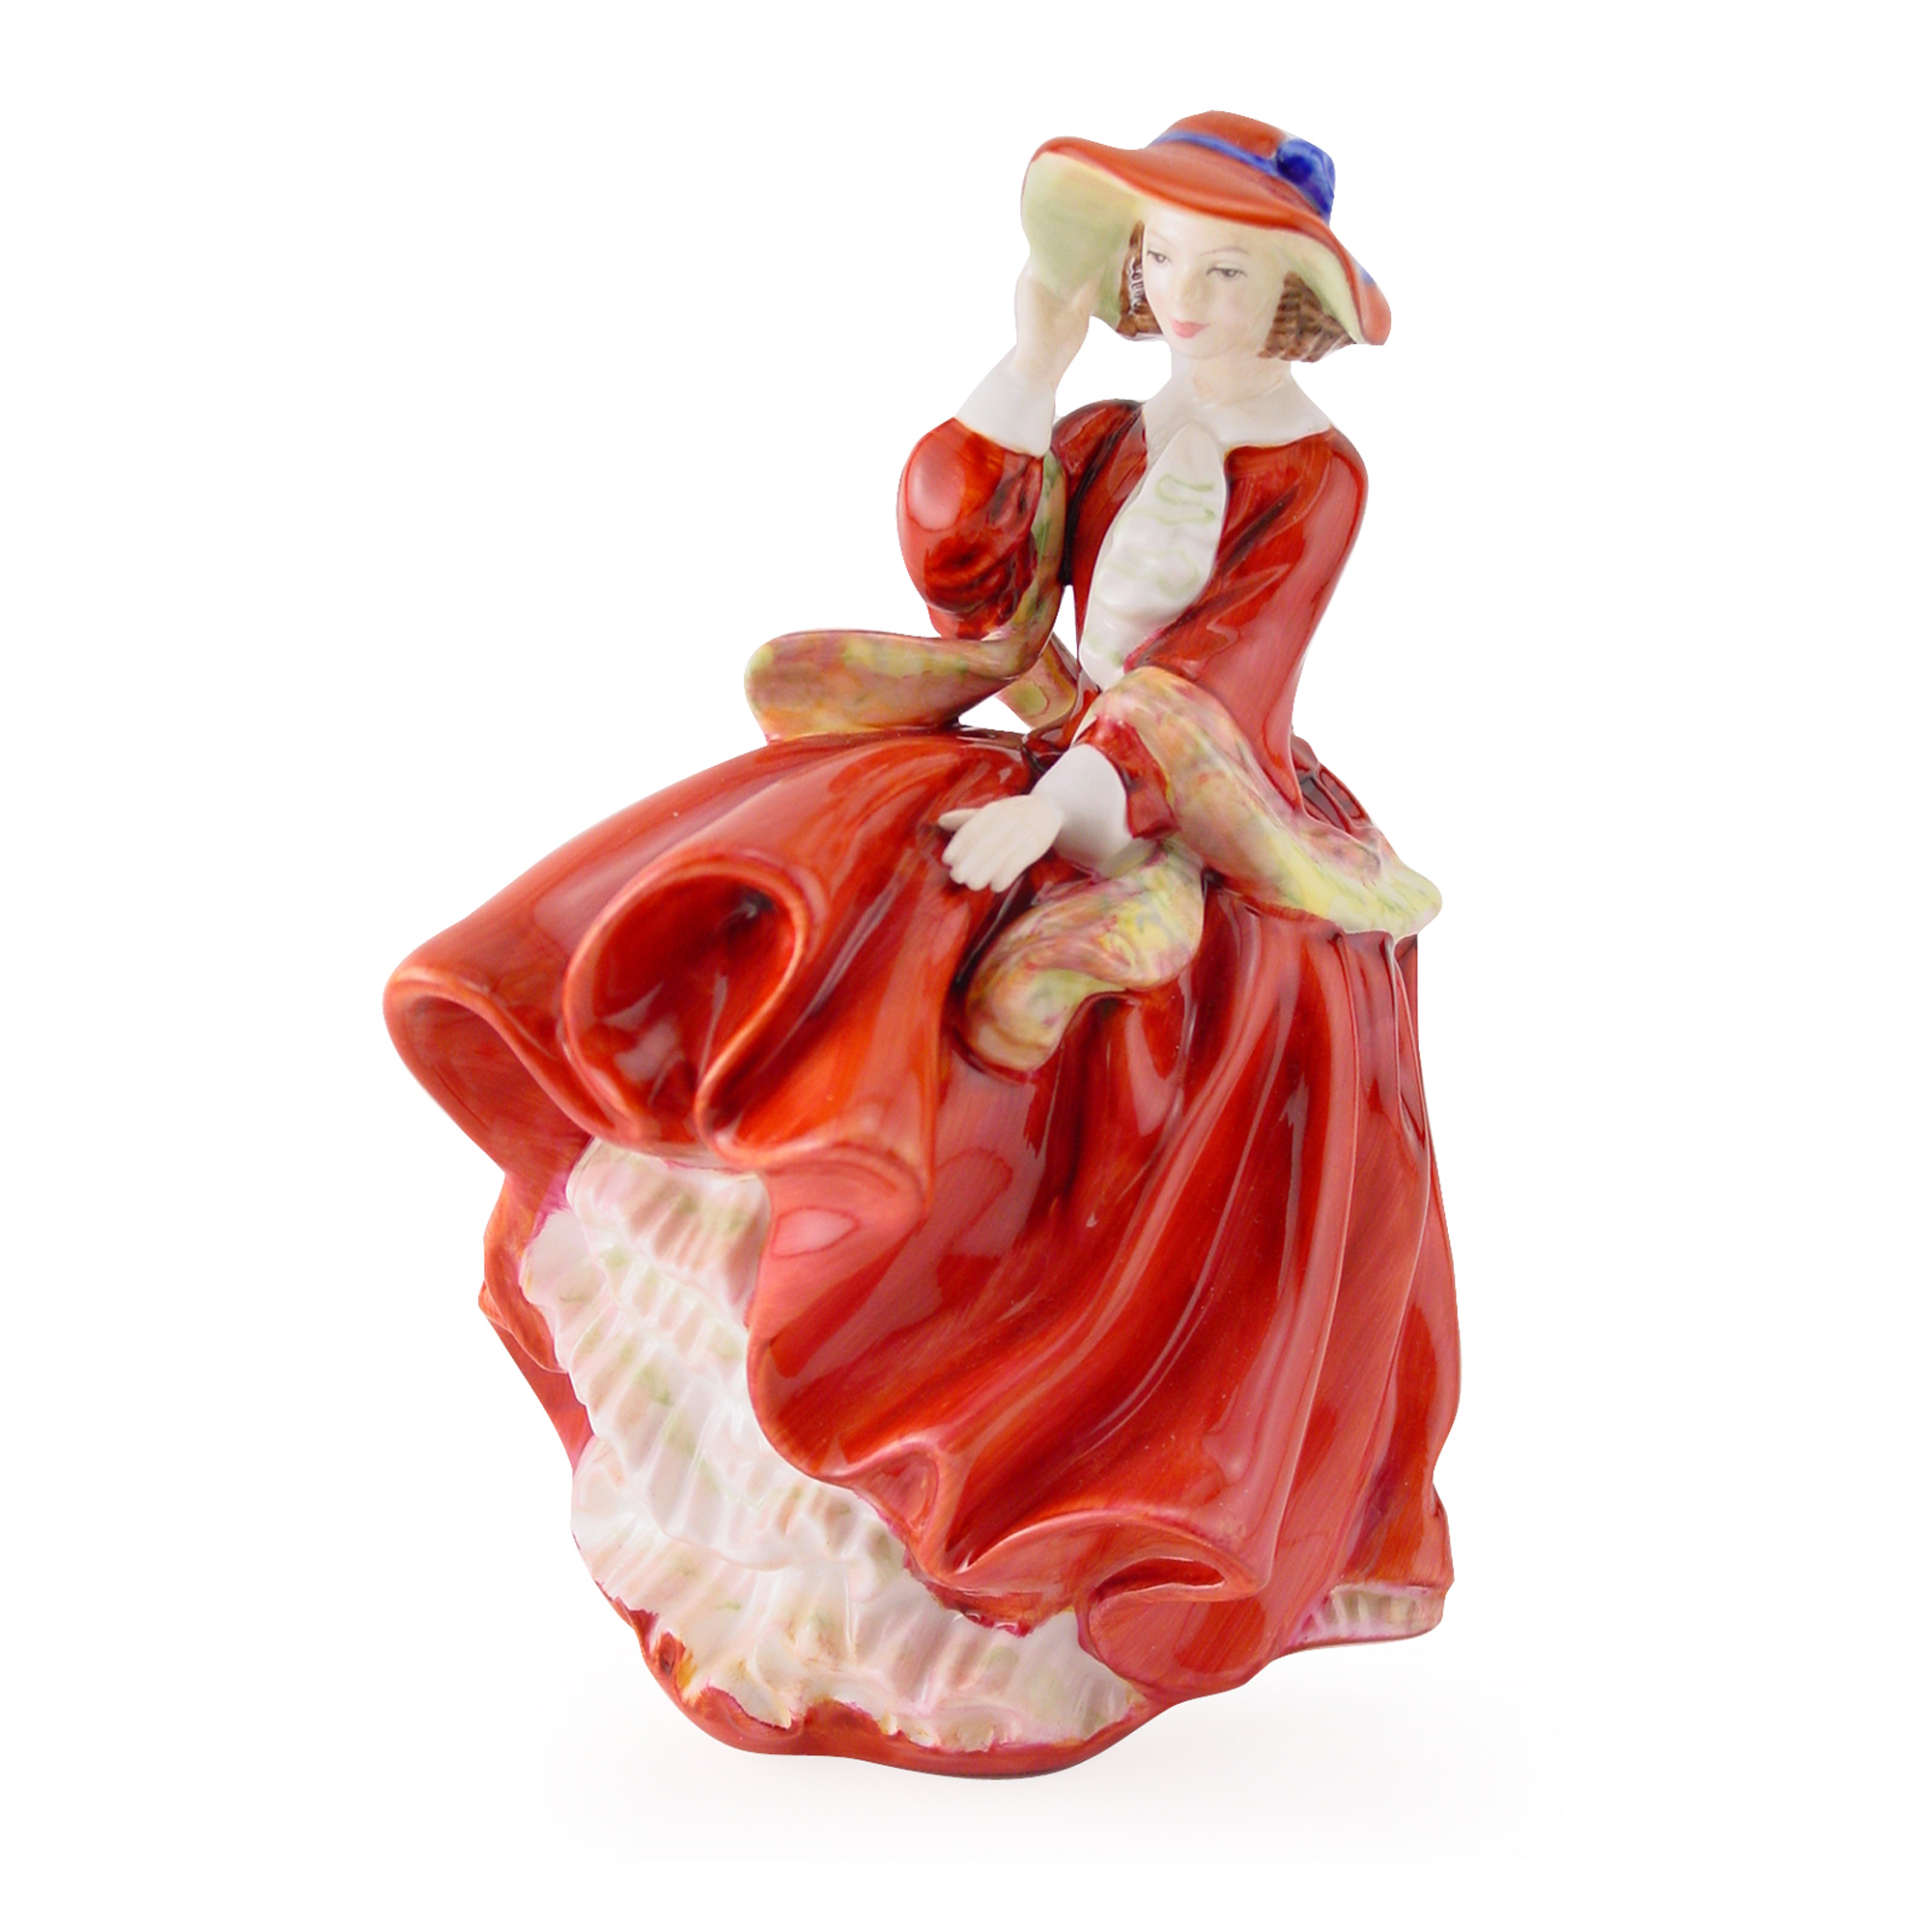 Top O' The Hill HN3499 - Royal Doulton Figurine | Seaway China Co.